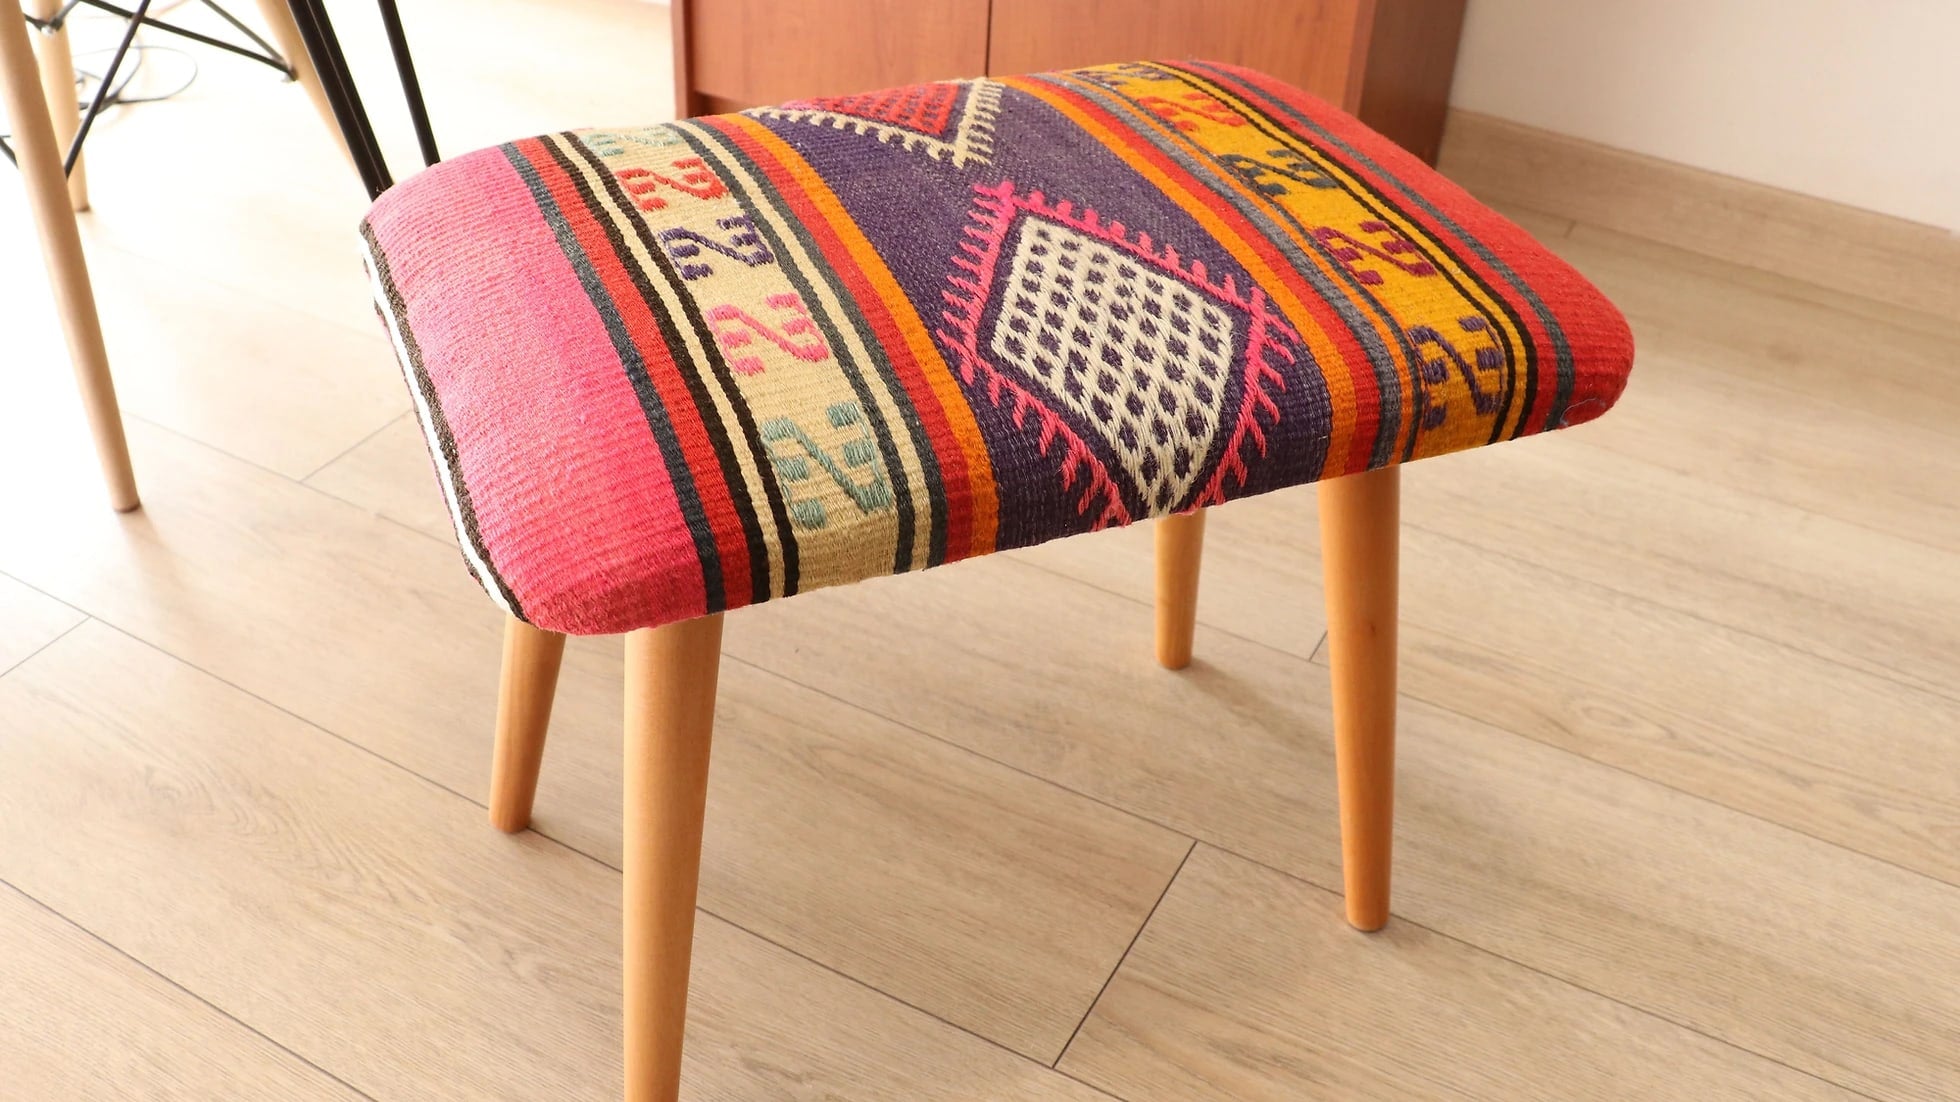 colorful and magnificent ottoman stool bench sustainably handcrafted by local Turkish artisans featuring traditional kilim motifs